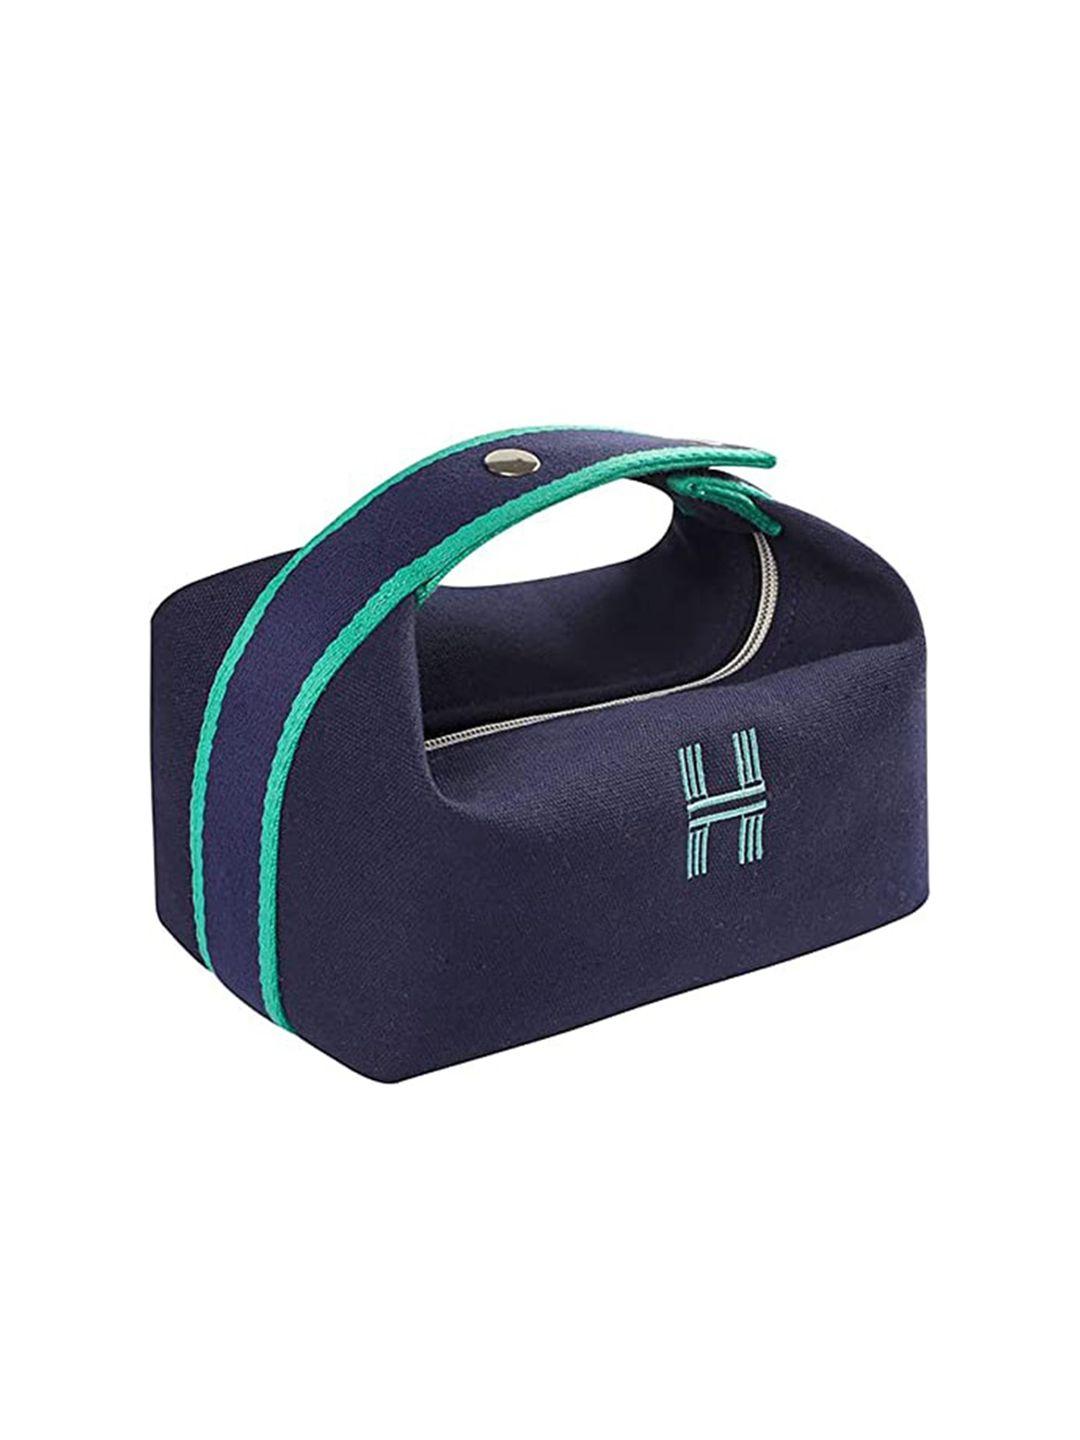 house of quirk makeup travel toiletry bag